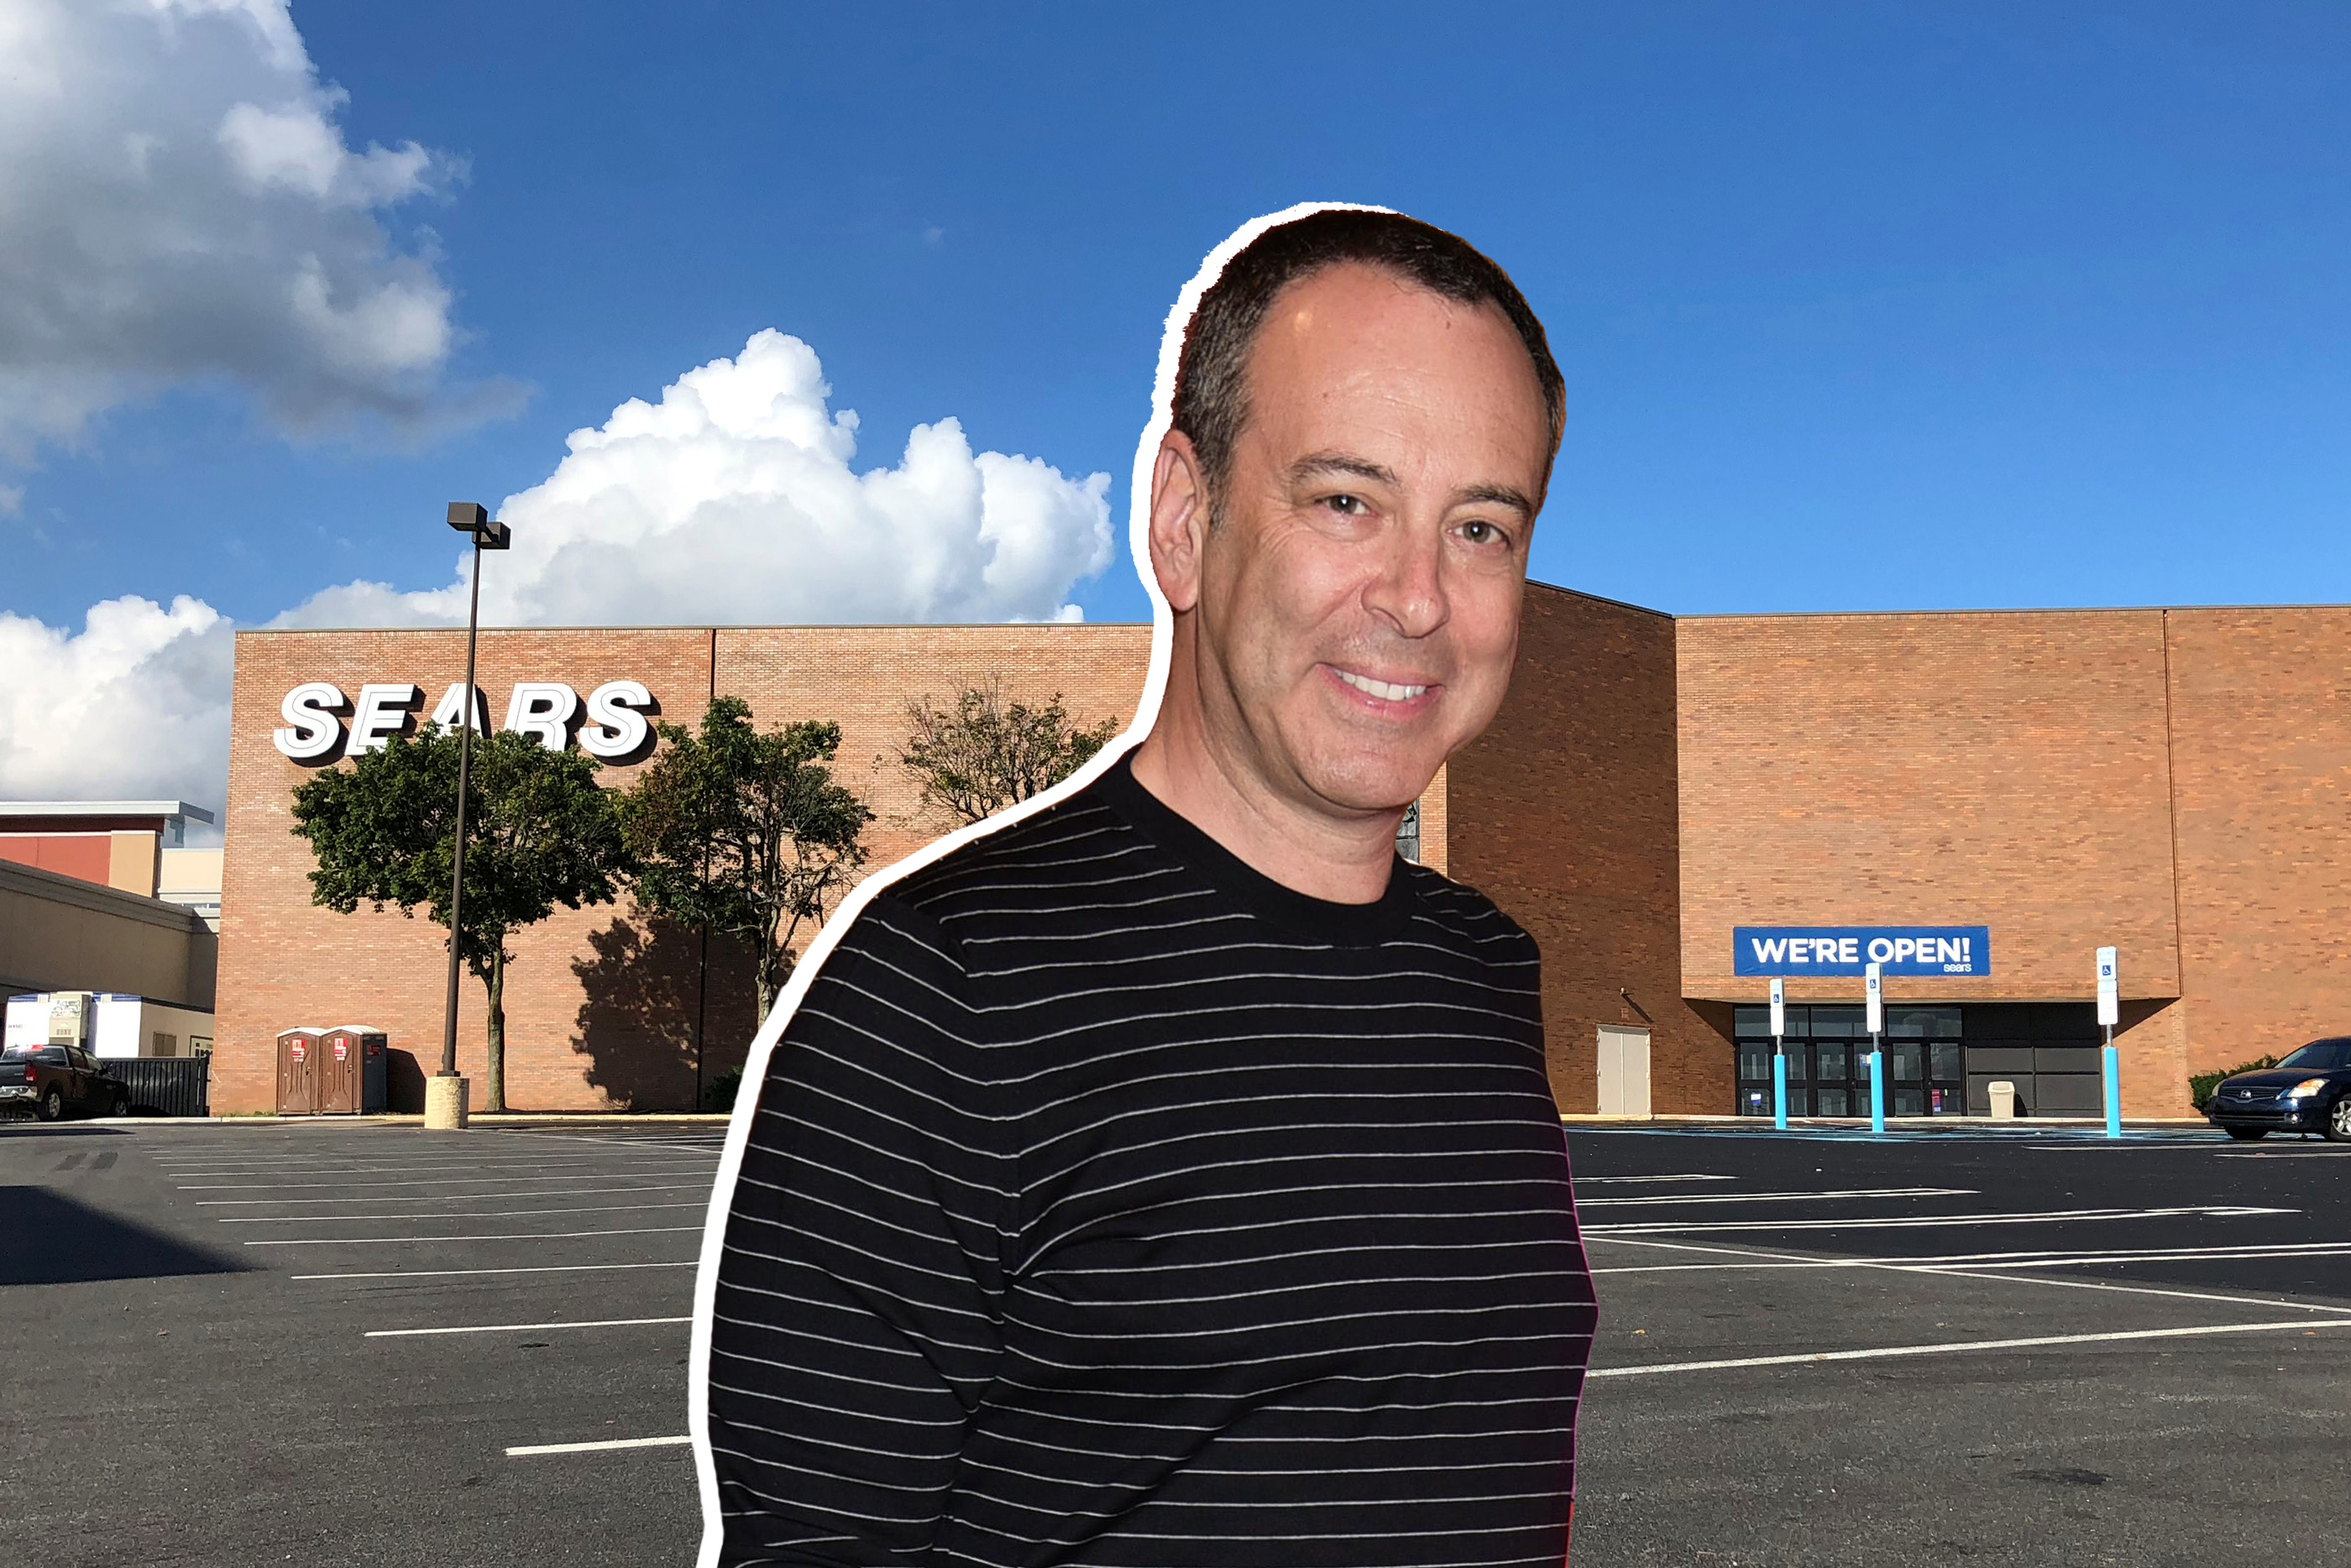 Meet Eddie Lampert, the Billionaire Investor Who Once Negotiated His Way Out of a Kidnapping and Is Now Trying to Save Sears